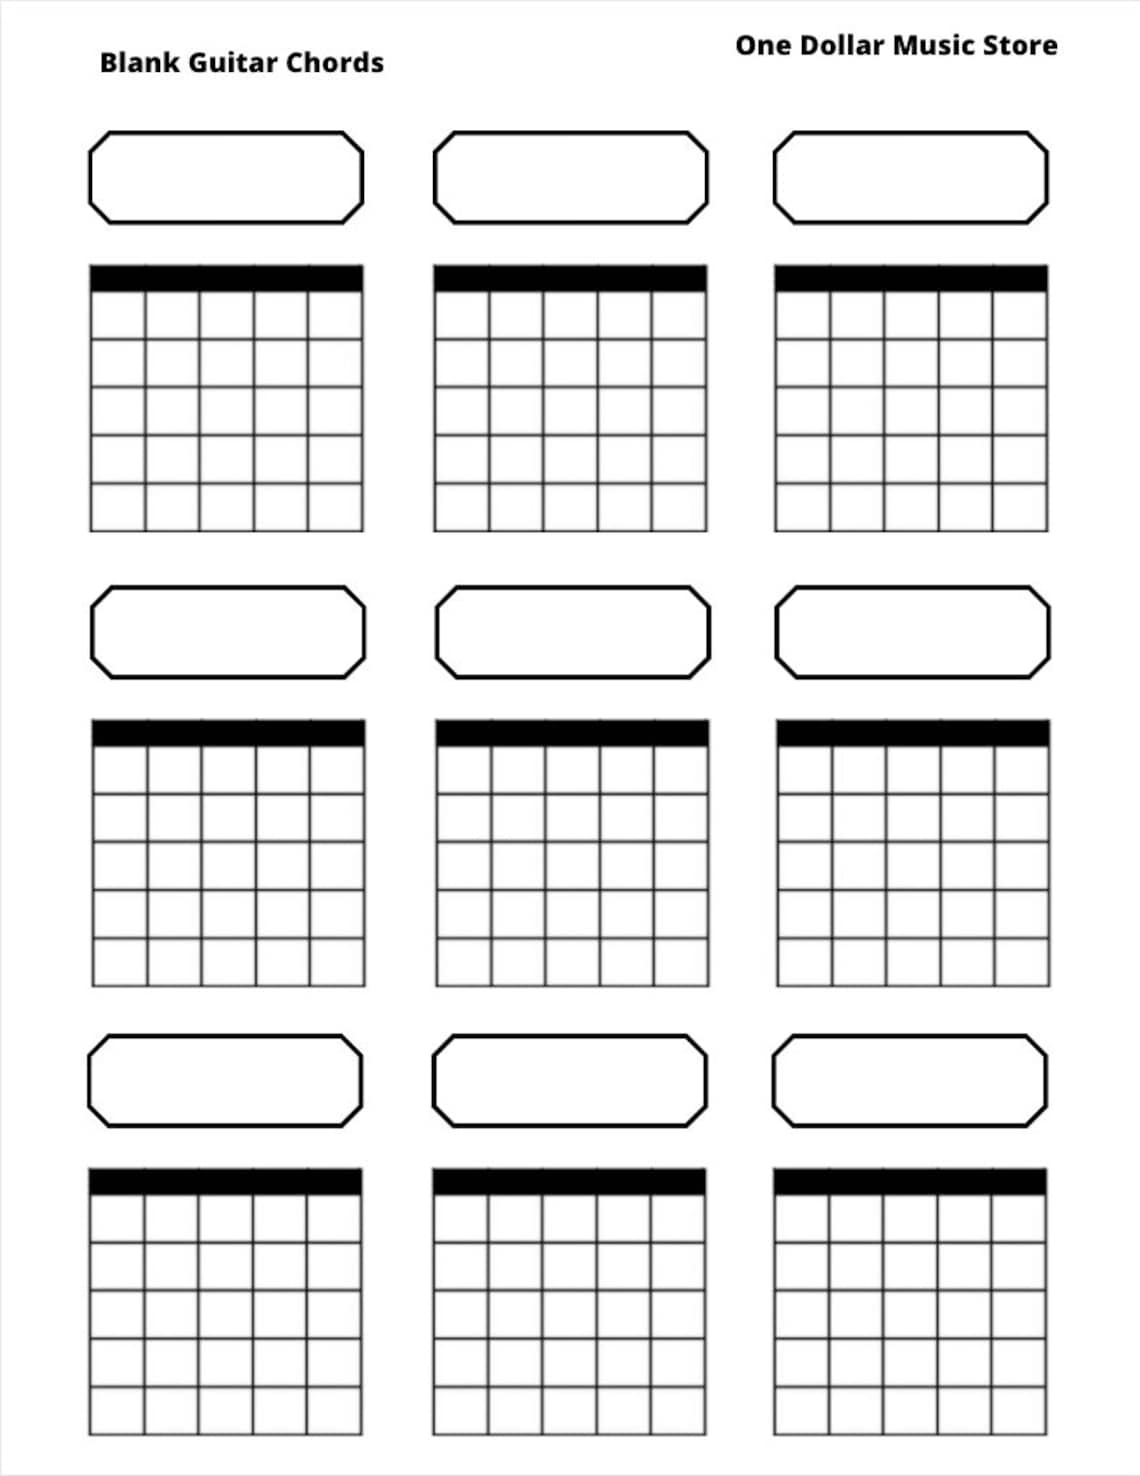 printable-blank-guitar-chord-chart-instant-downloadnew-years-etsy